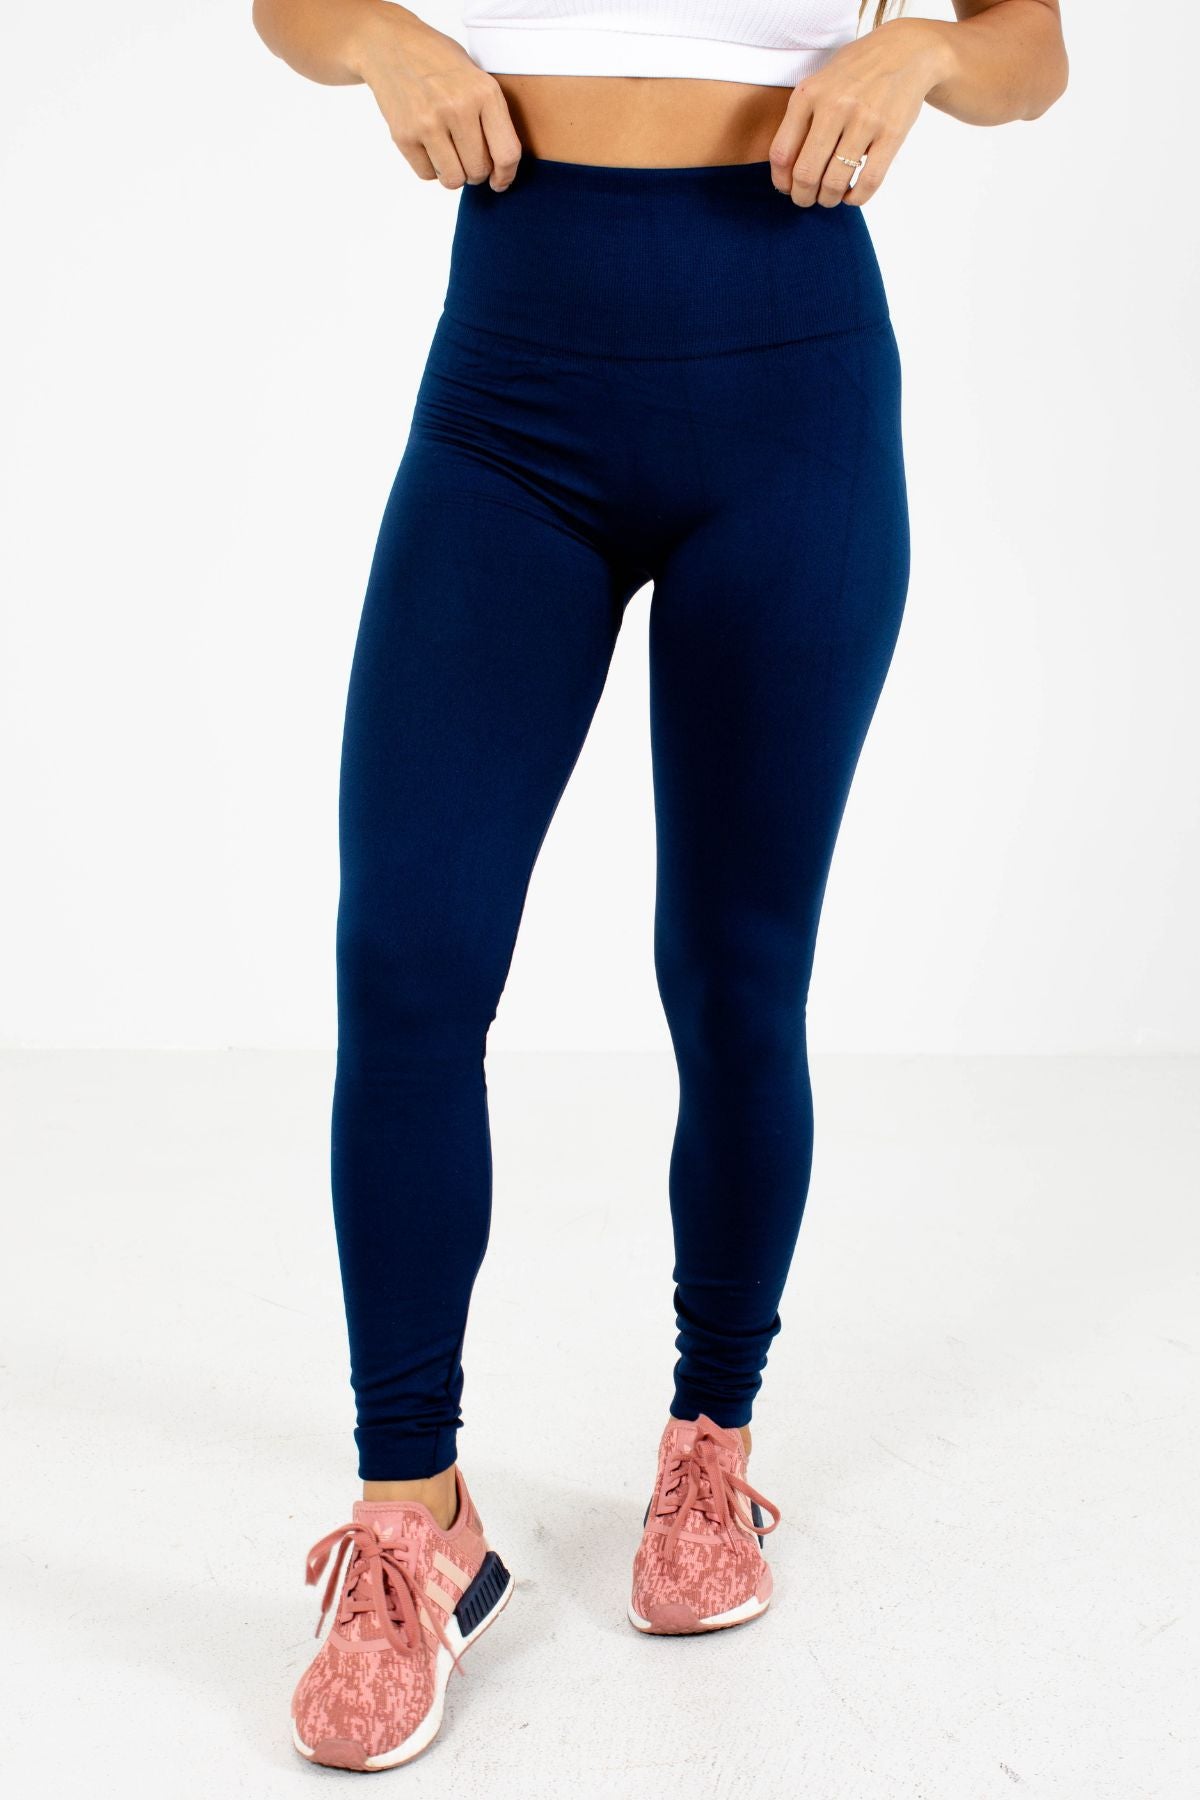 Dark Blue Cute and Comfortable Boutique Activewear Leggings for Women